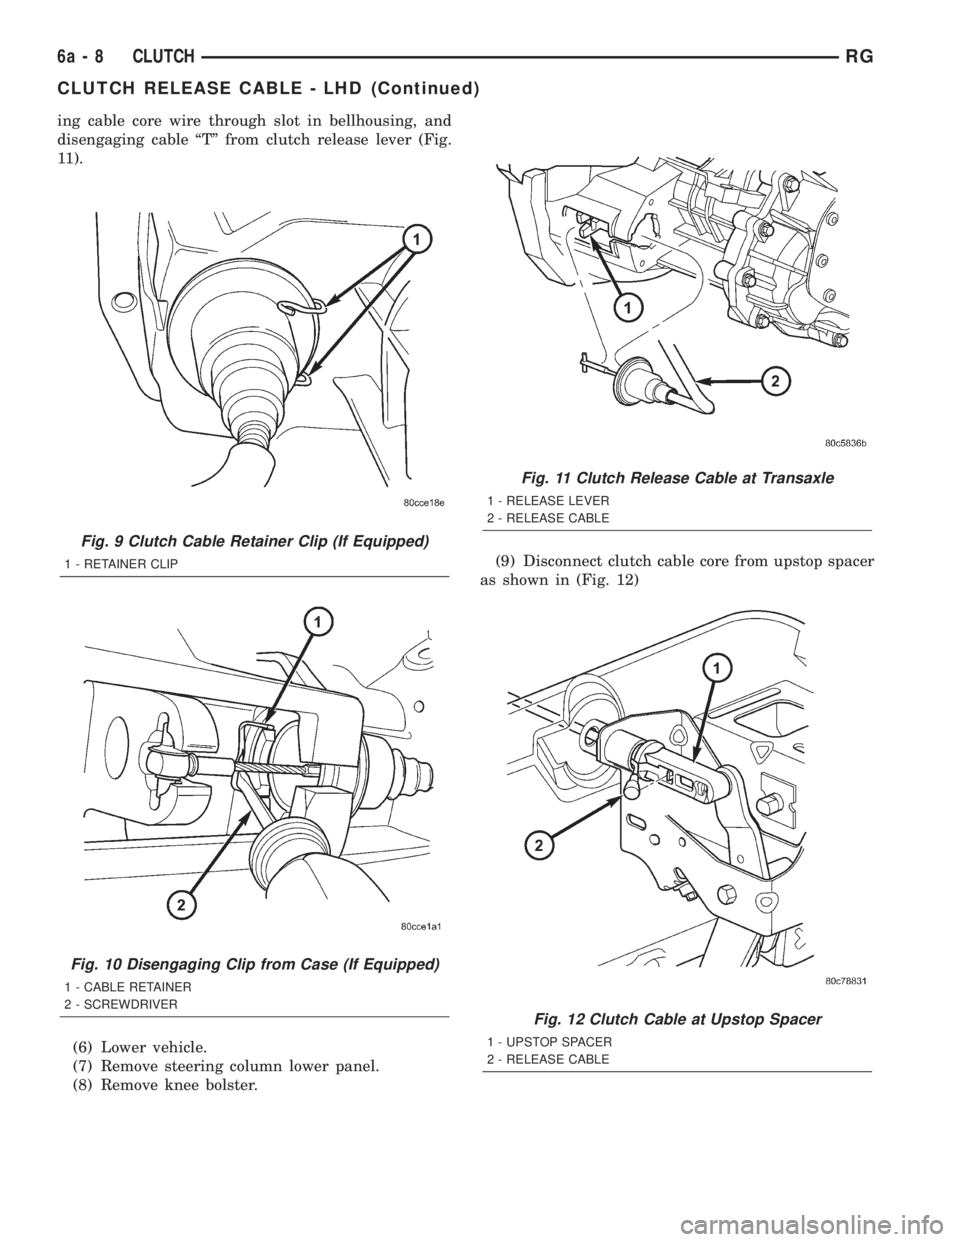 CHRYSLER VOYAGER 2001  Service Manual ing cable core wire through slot in bellhousing, and
disengaging cable ªTº from clutch release lever (Fig.
11).
(6) Lower vehicle.
(7) Remove steering column lower panel.
(8) Remove knee bolster.(9)